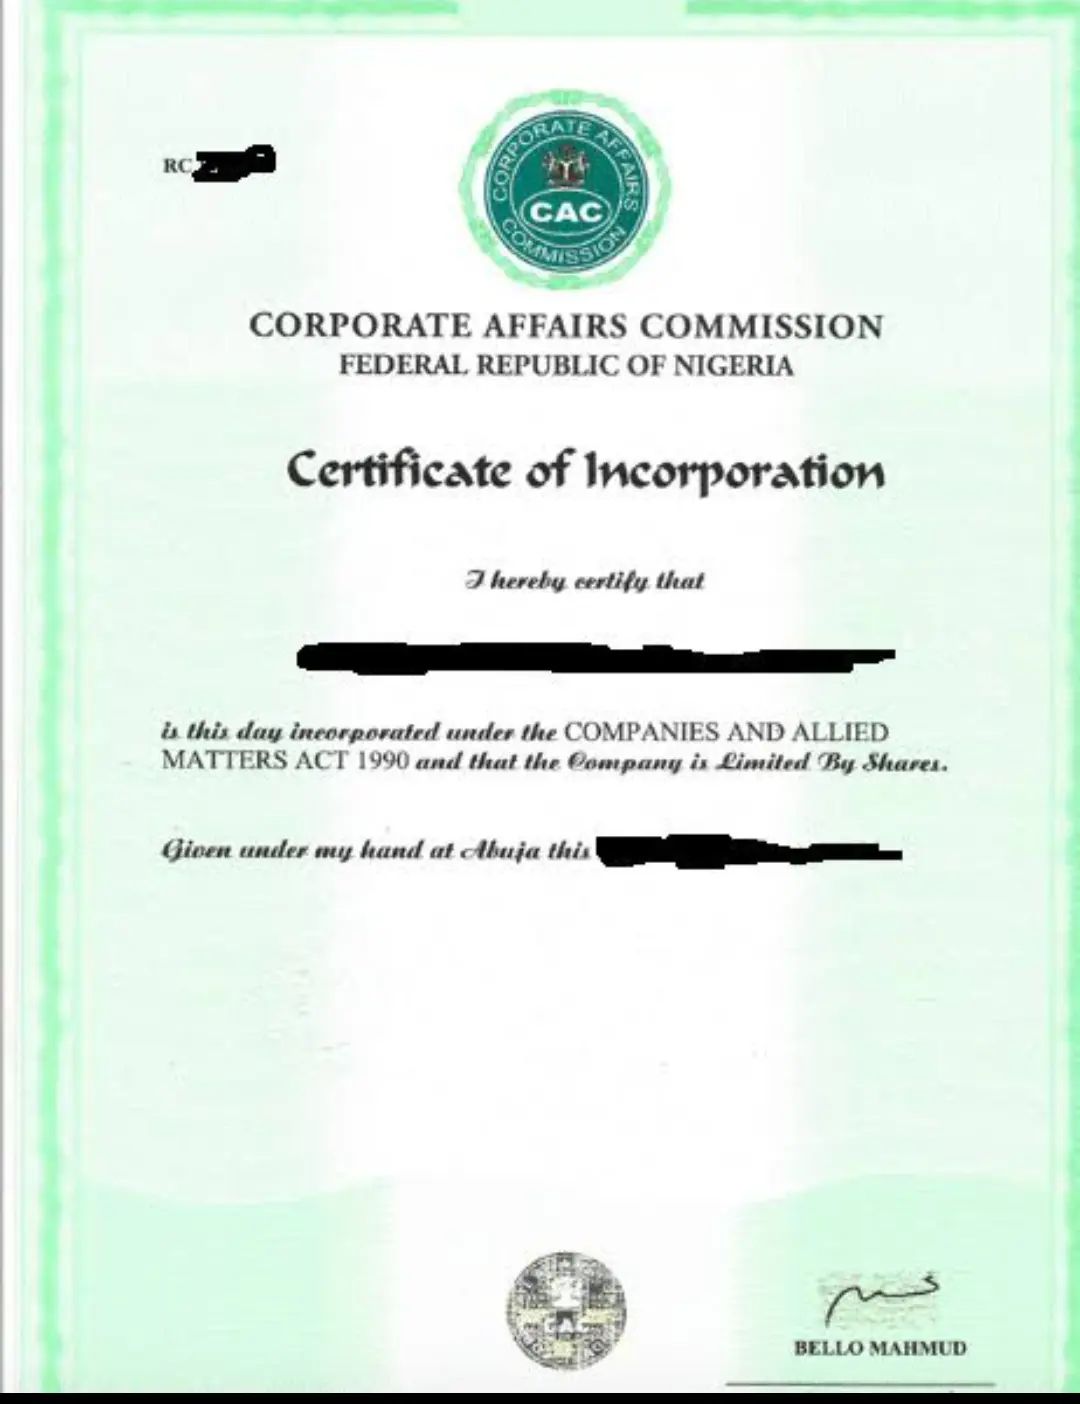 CAC Business Registration, Services